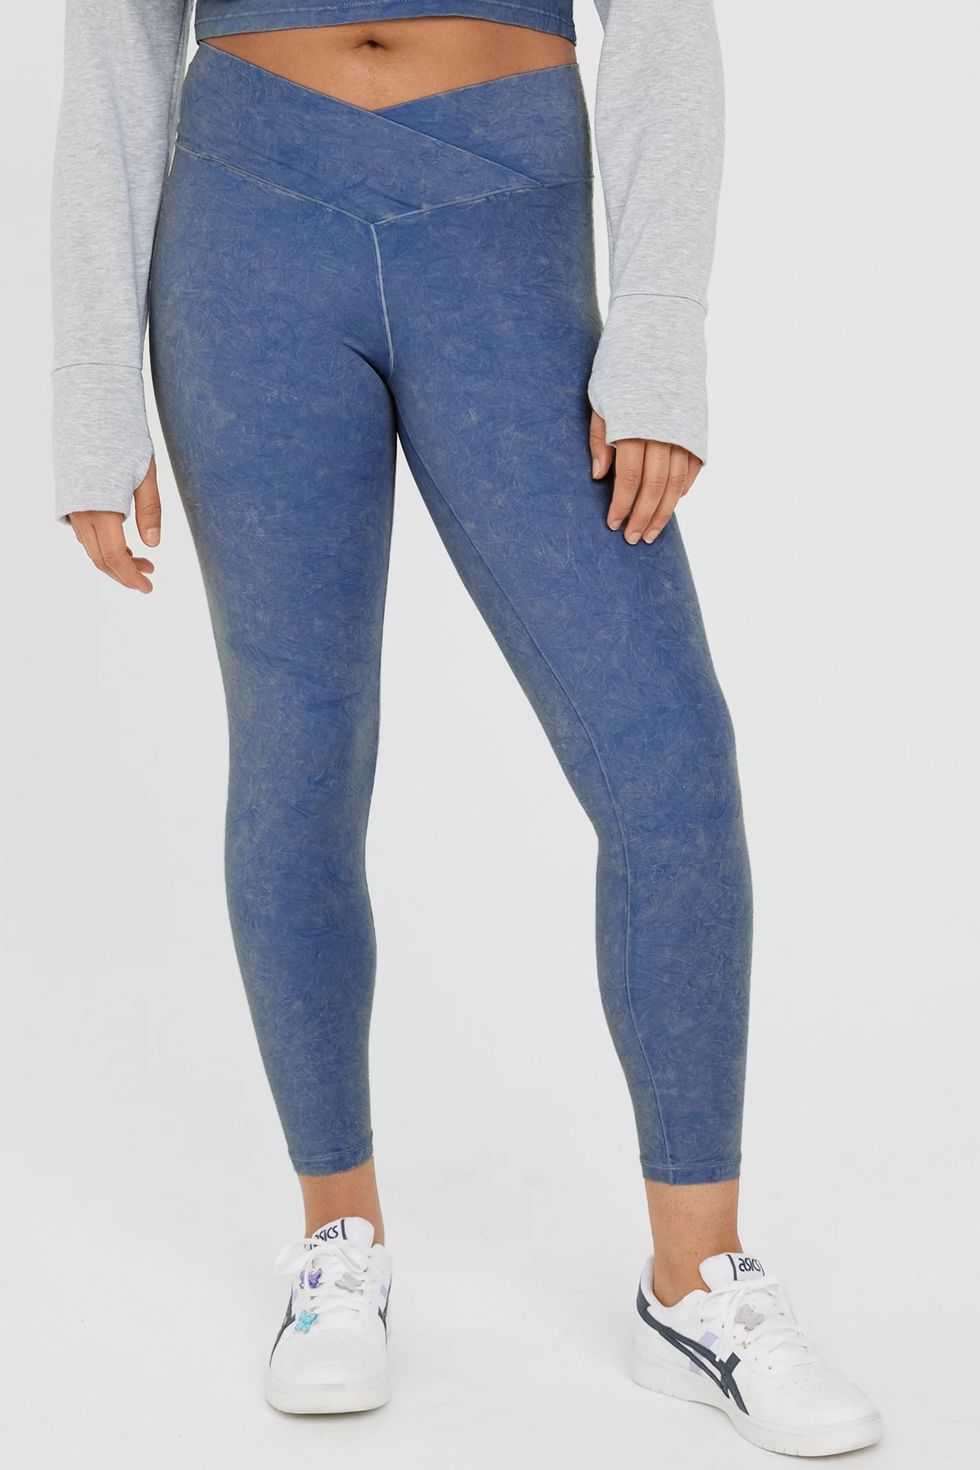 Aerie's Crossover Leggings Are Now on Sale, Starting at 25% Off